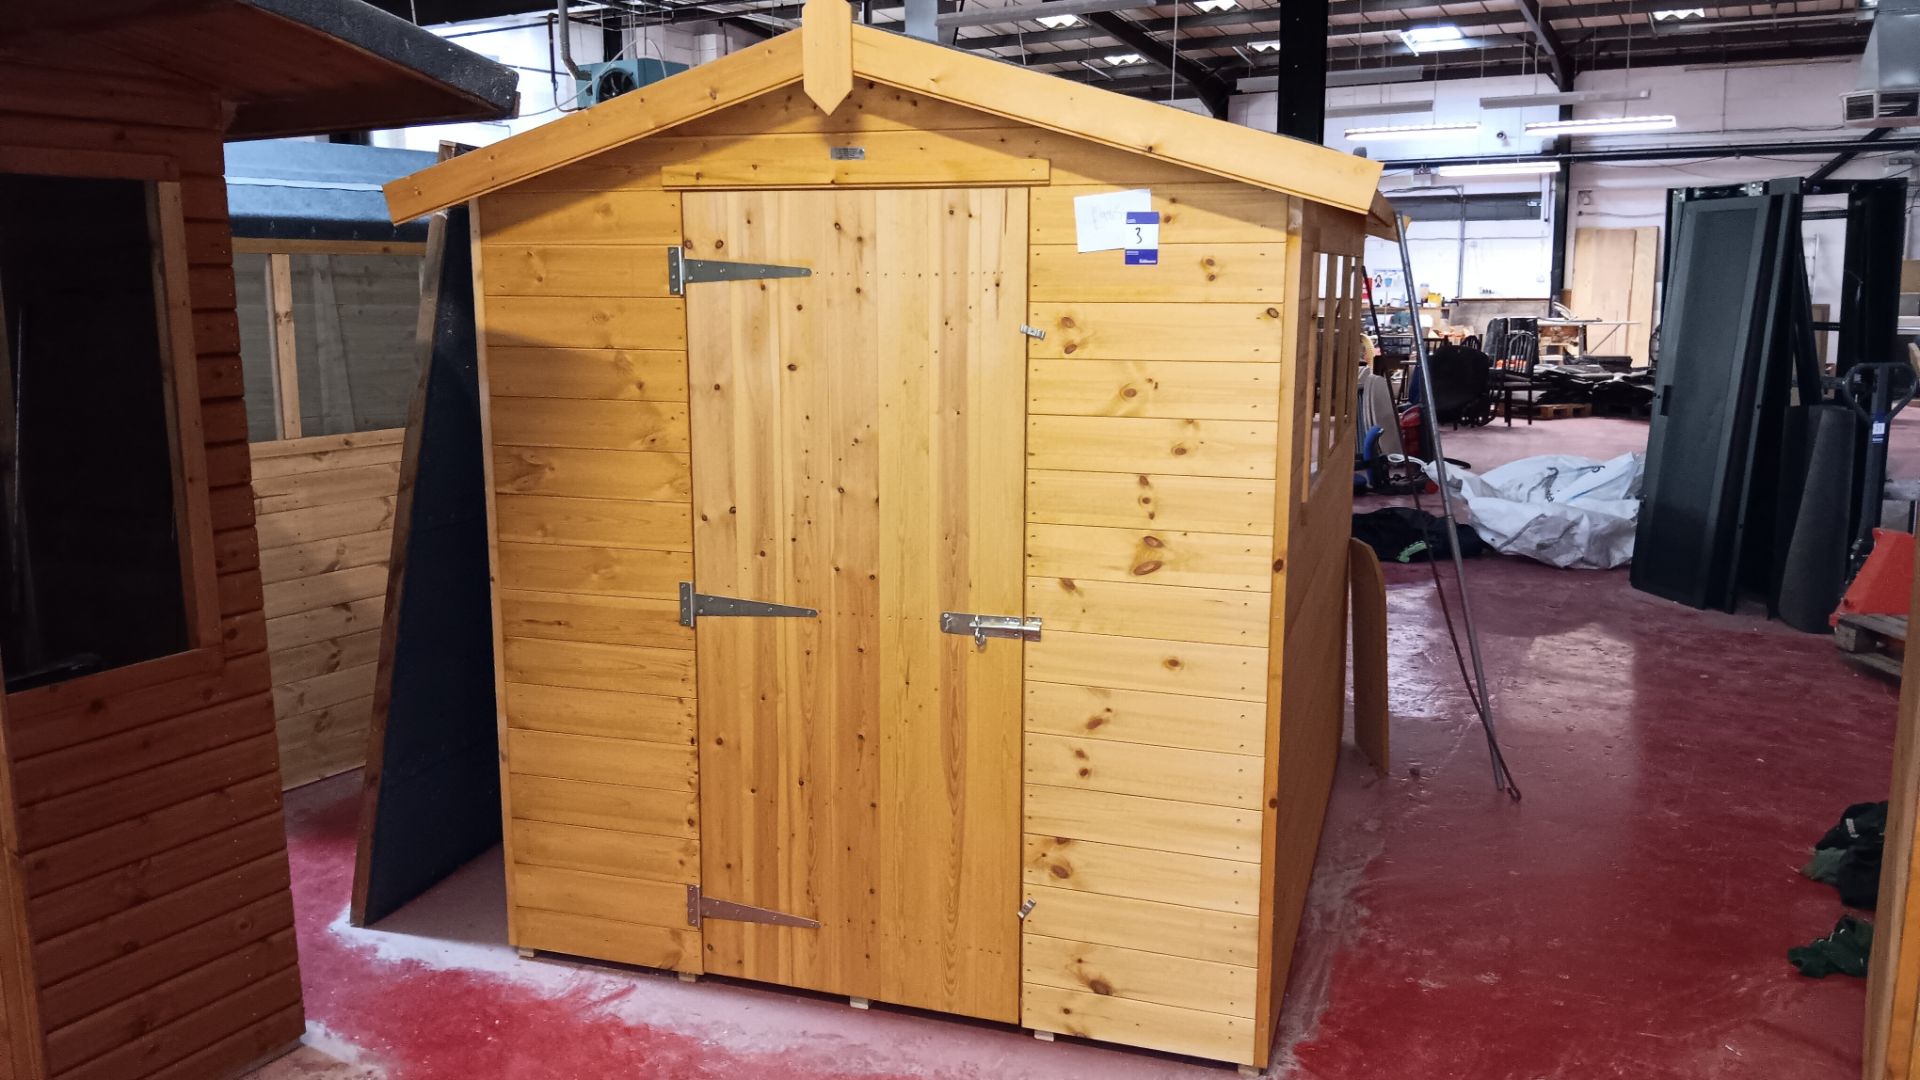 8 x 6 apex shed, Pressure treated battens to base, Door hinged left, 16mm TGV throughout, Pad bolt